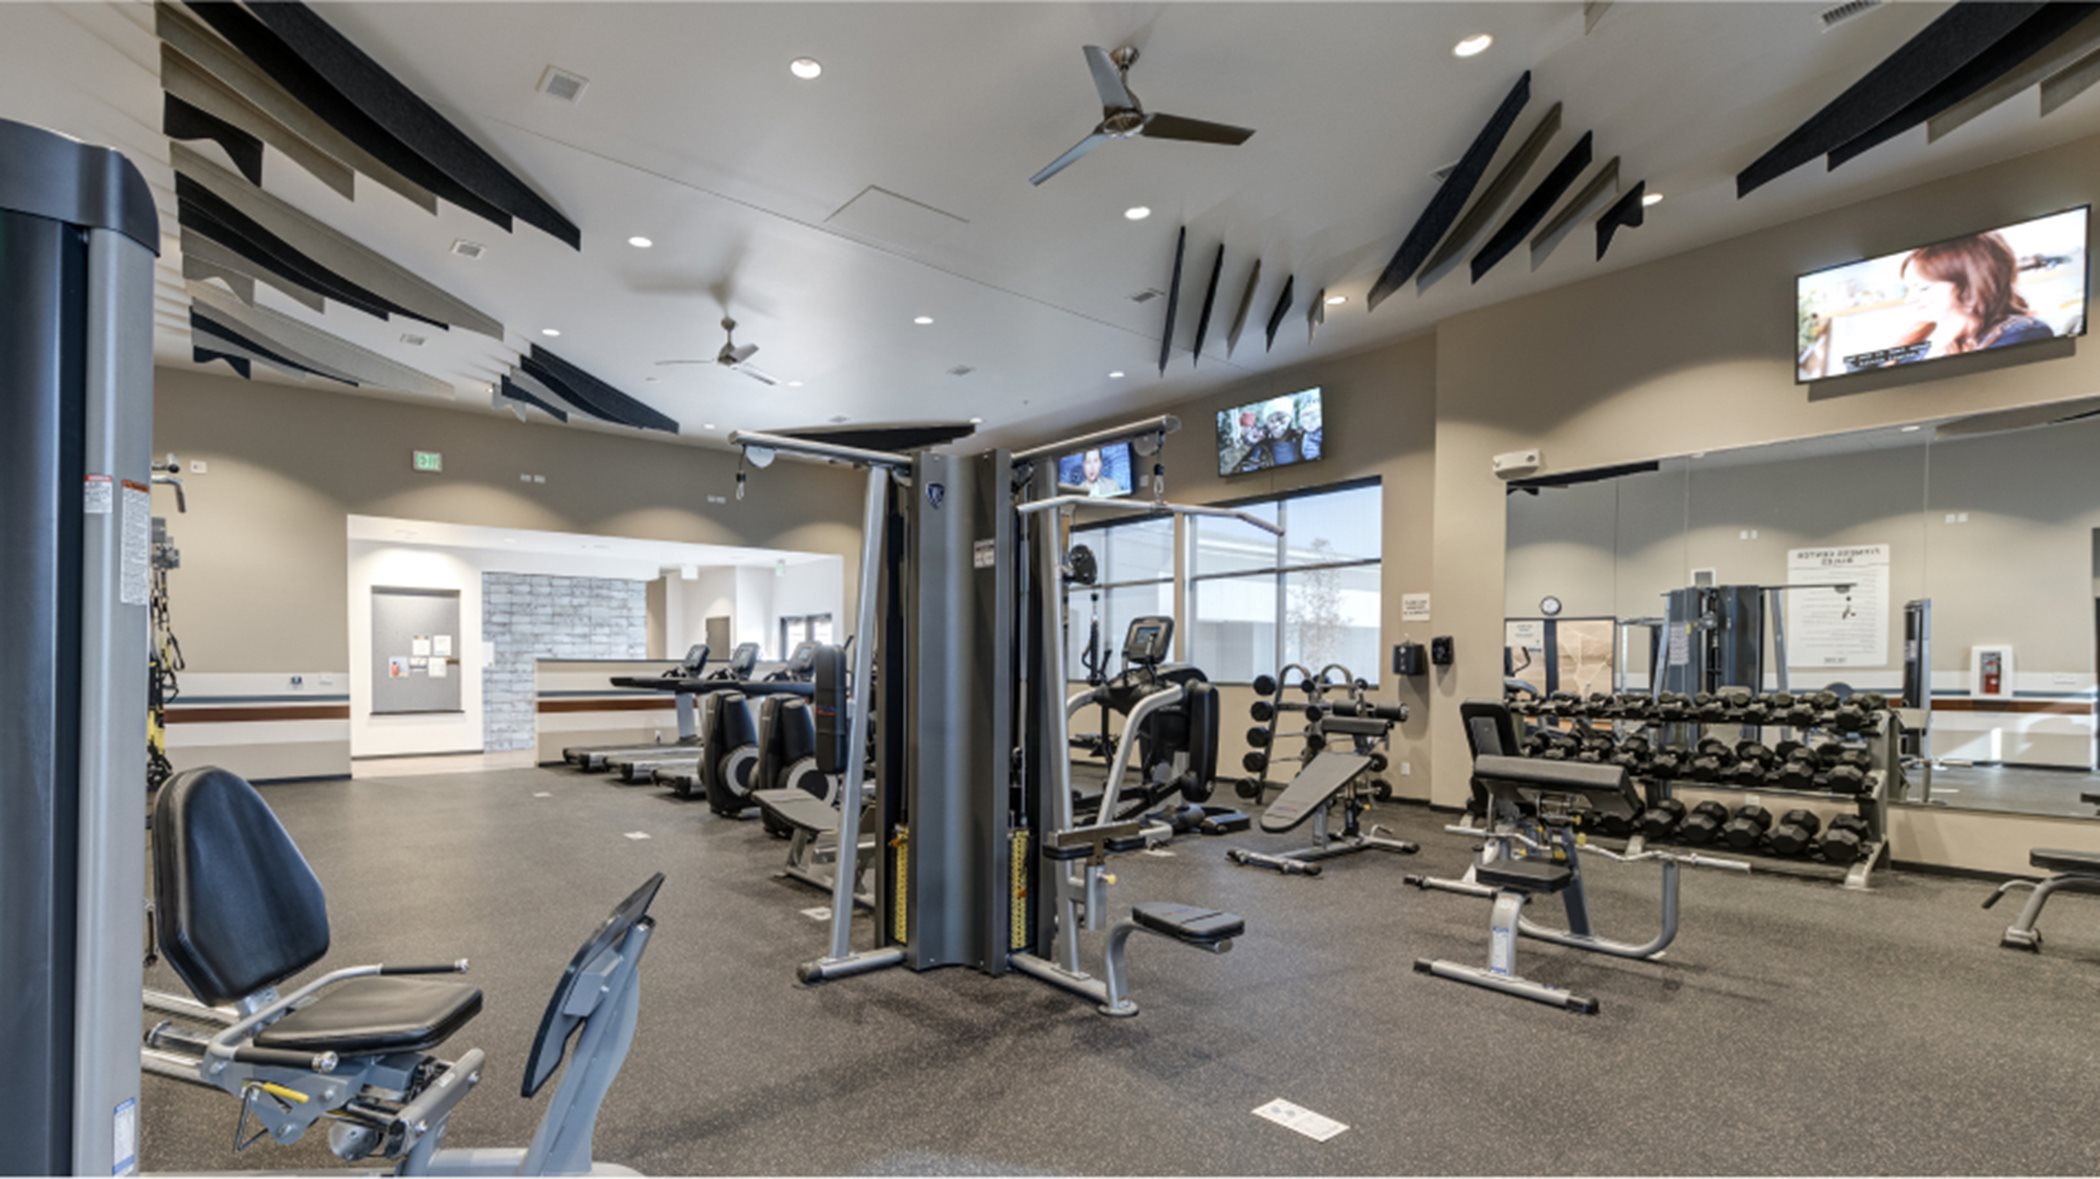 Barefoot Lakes amenity the cove fitness center